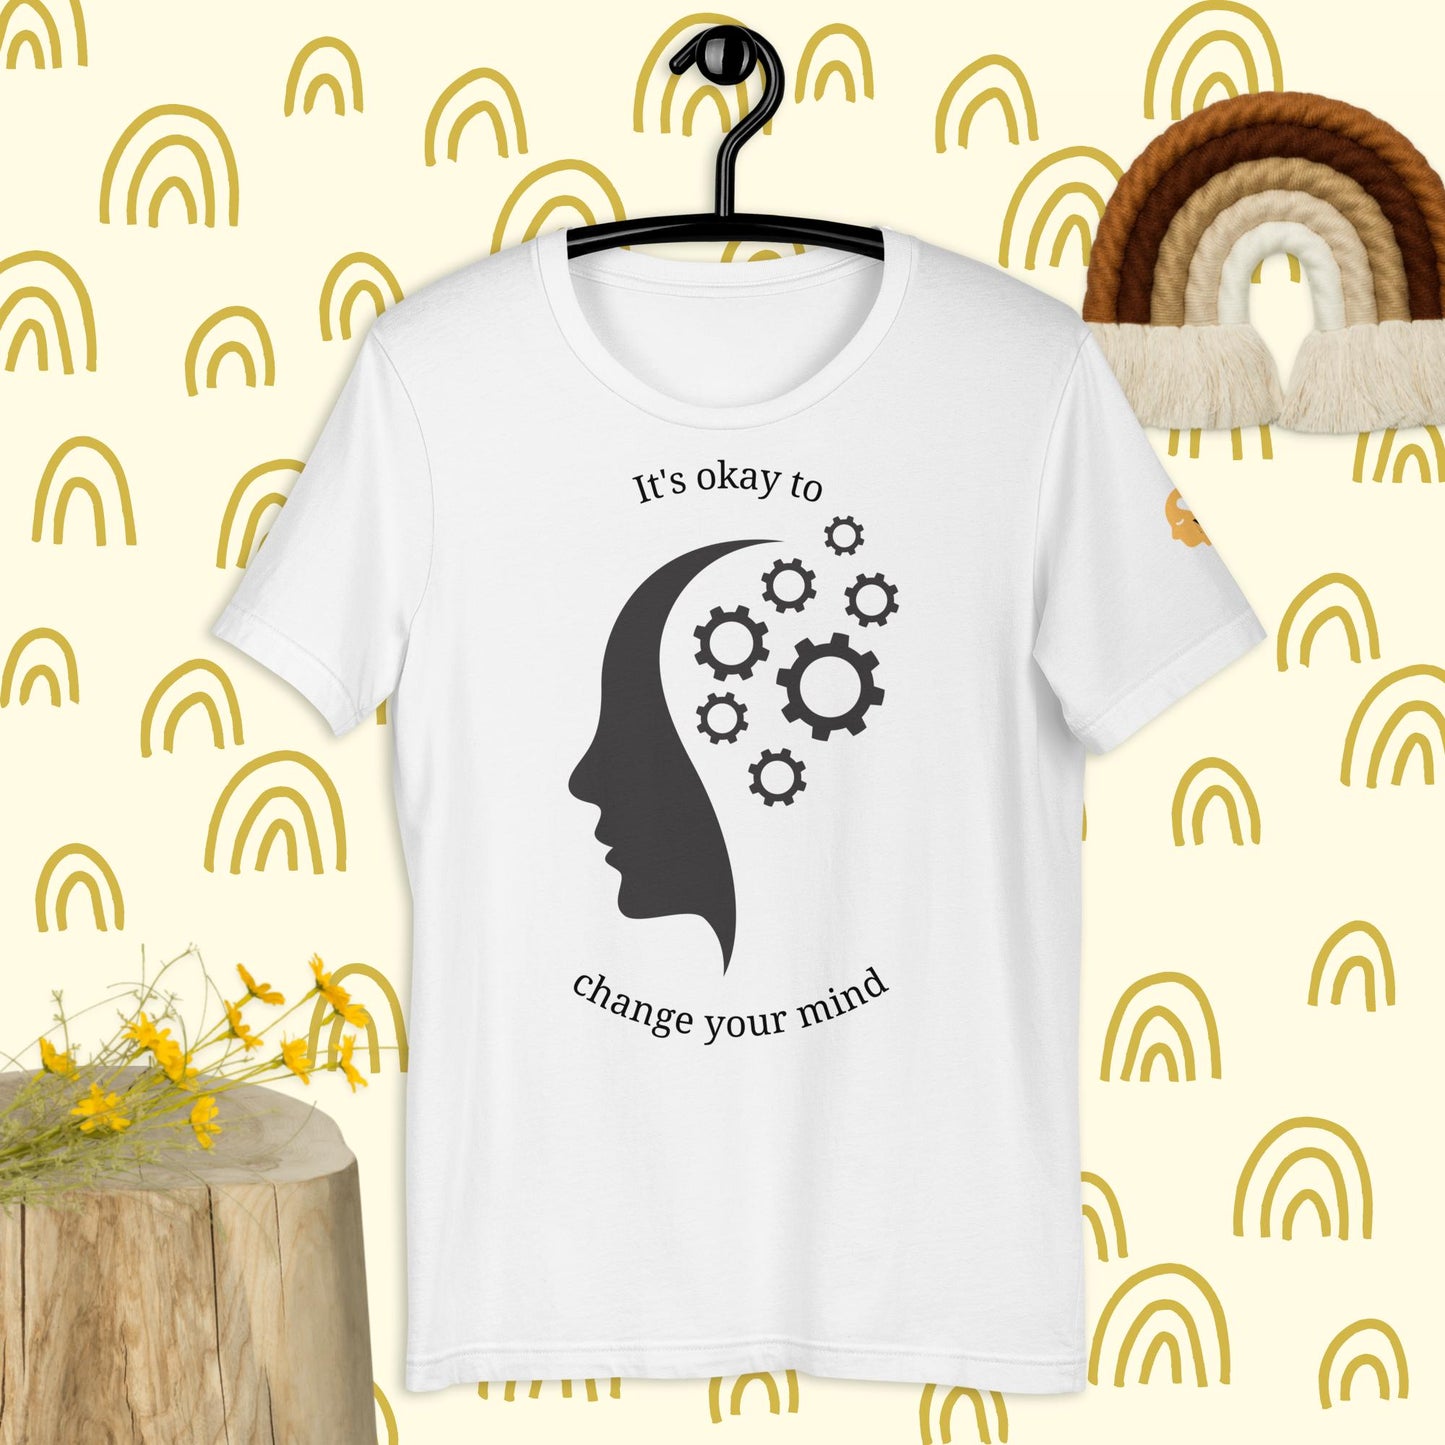 It's okay to change your mind t-shirt